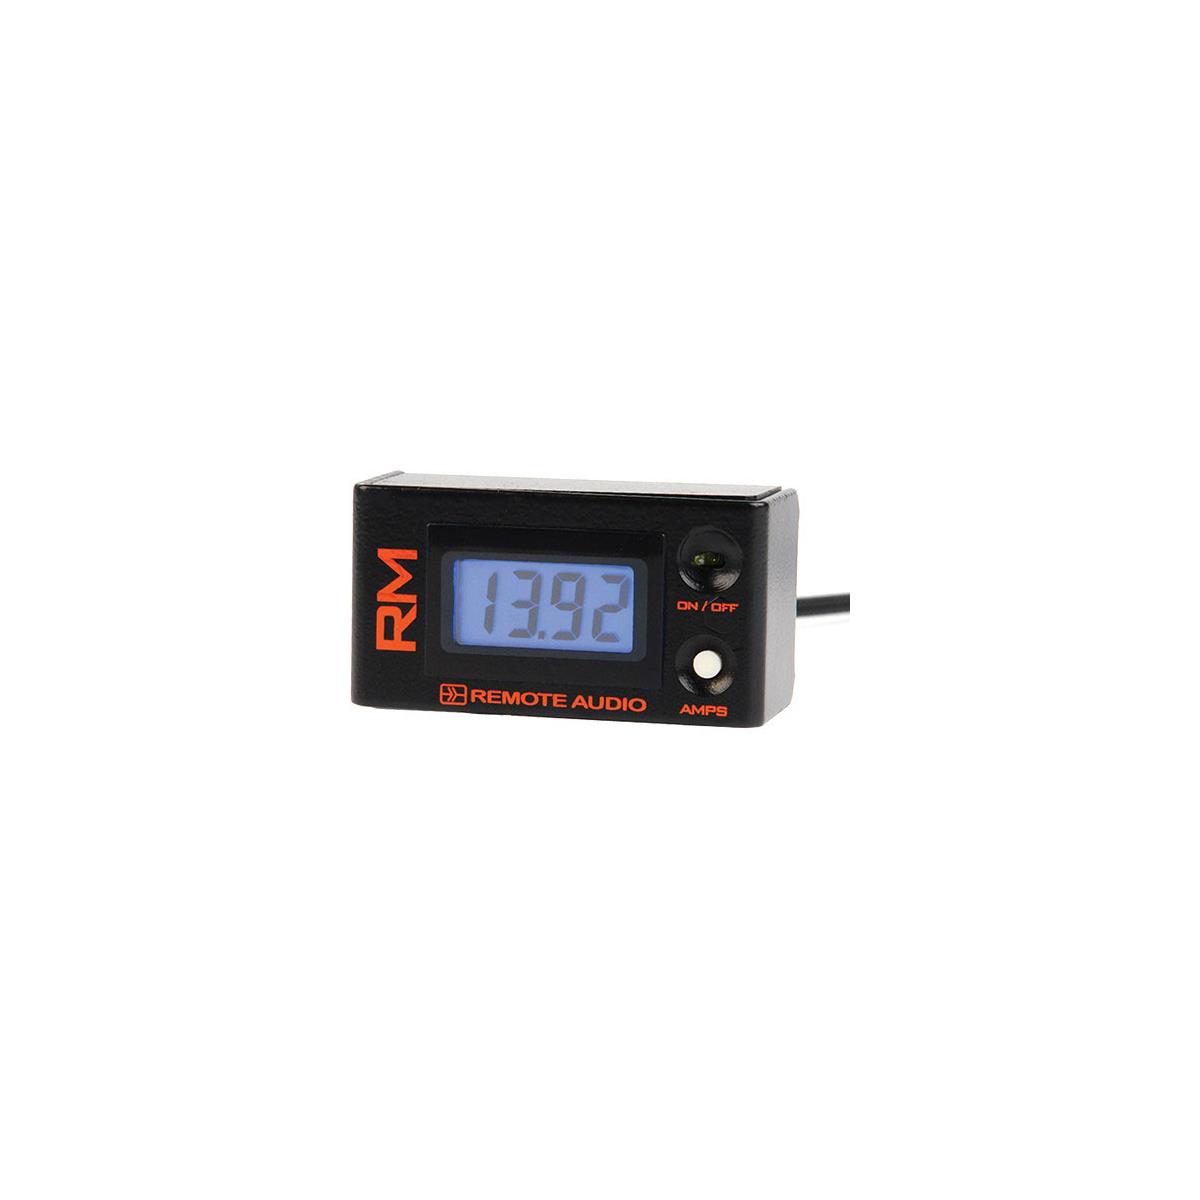 Image of Remote Audio RMv2 Remote Meter with 2' Cable for Battery Distribution Systems